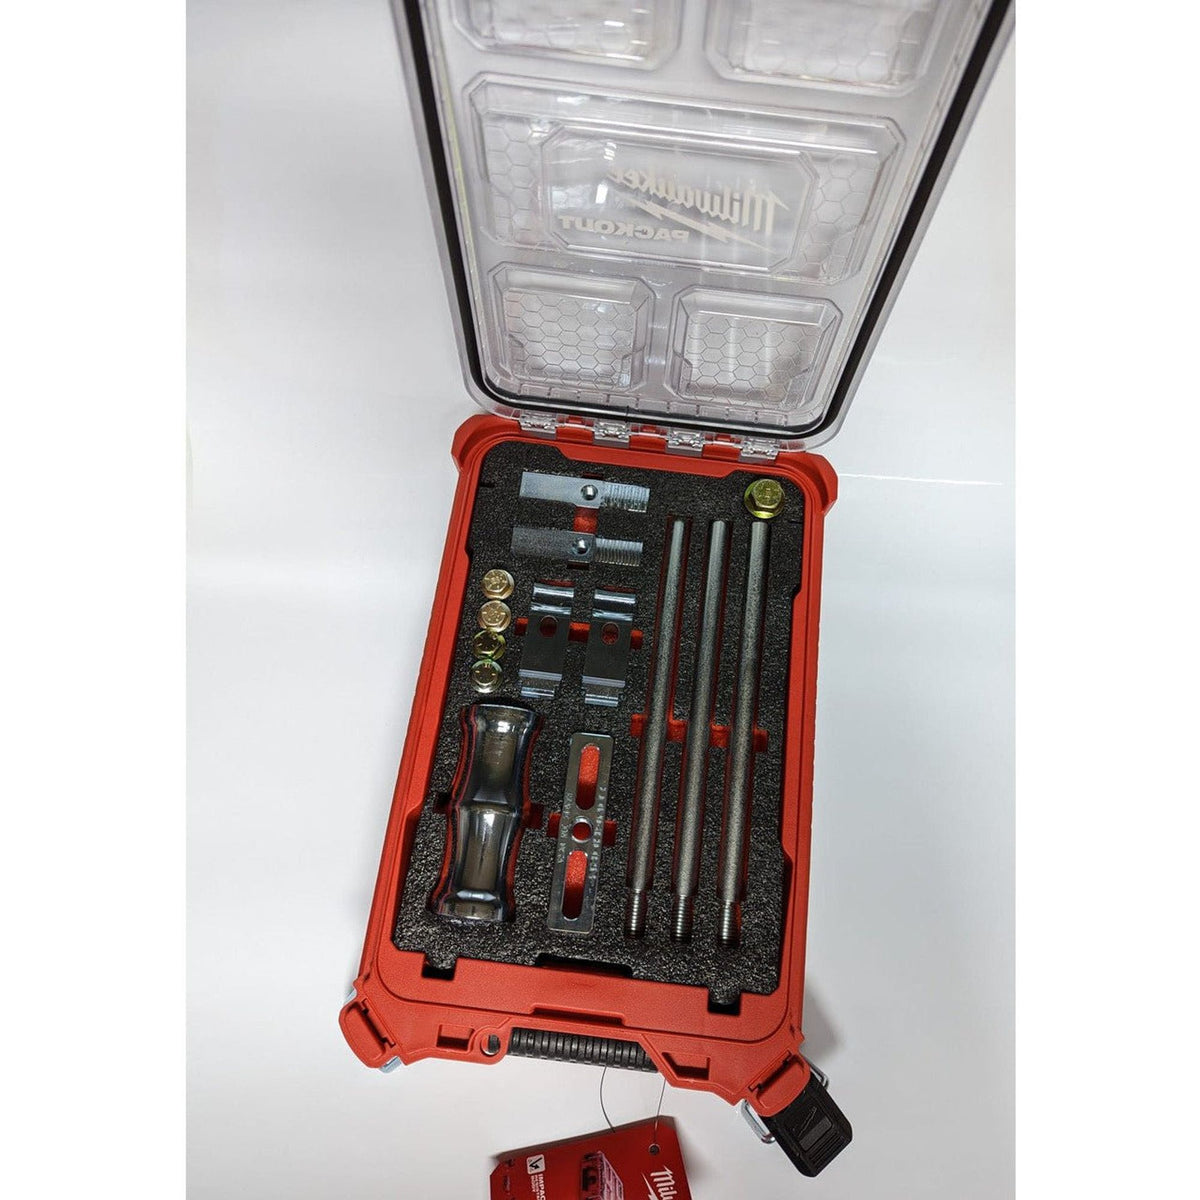 The Extractor CV Cup Puller Tool with Milwaukee Packout